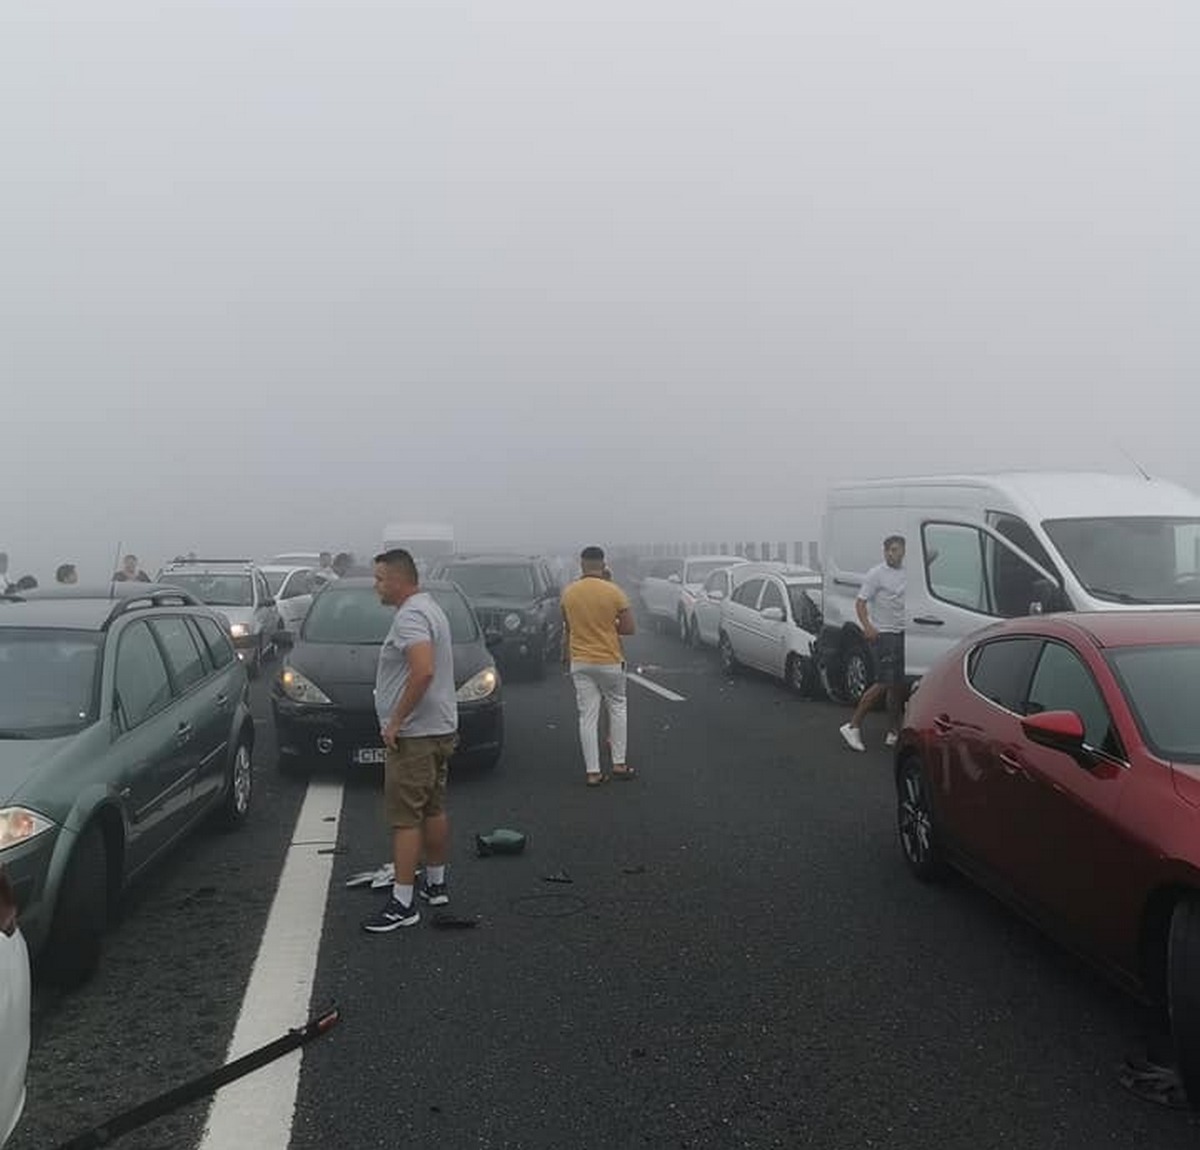 A large-scale car accident in Romania, 55 cars collided on the highway